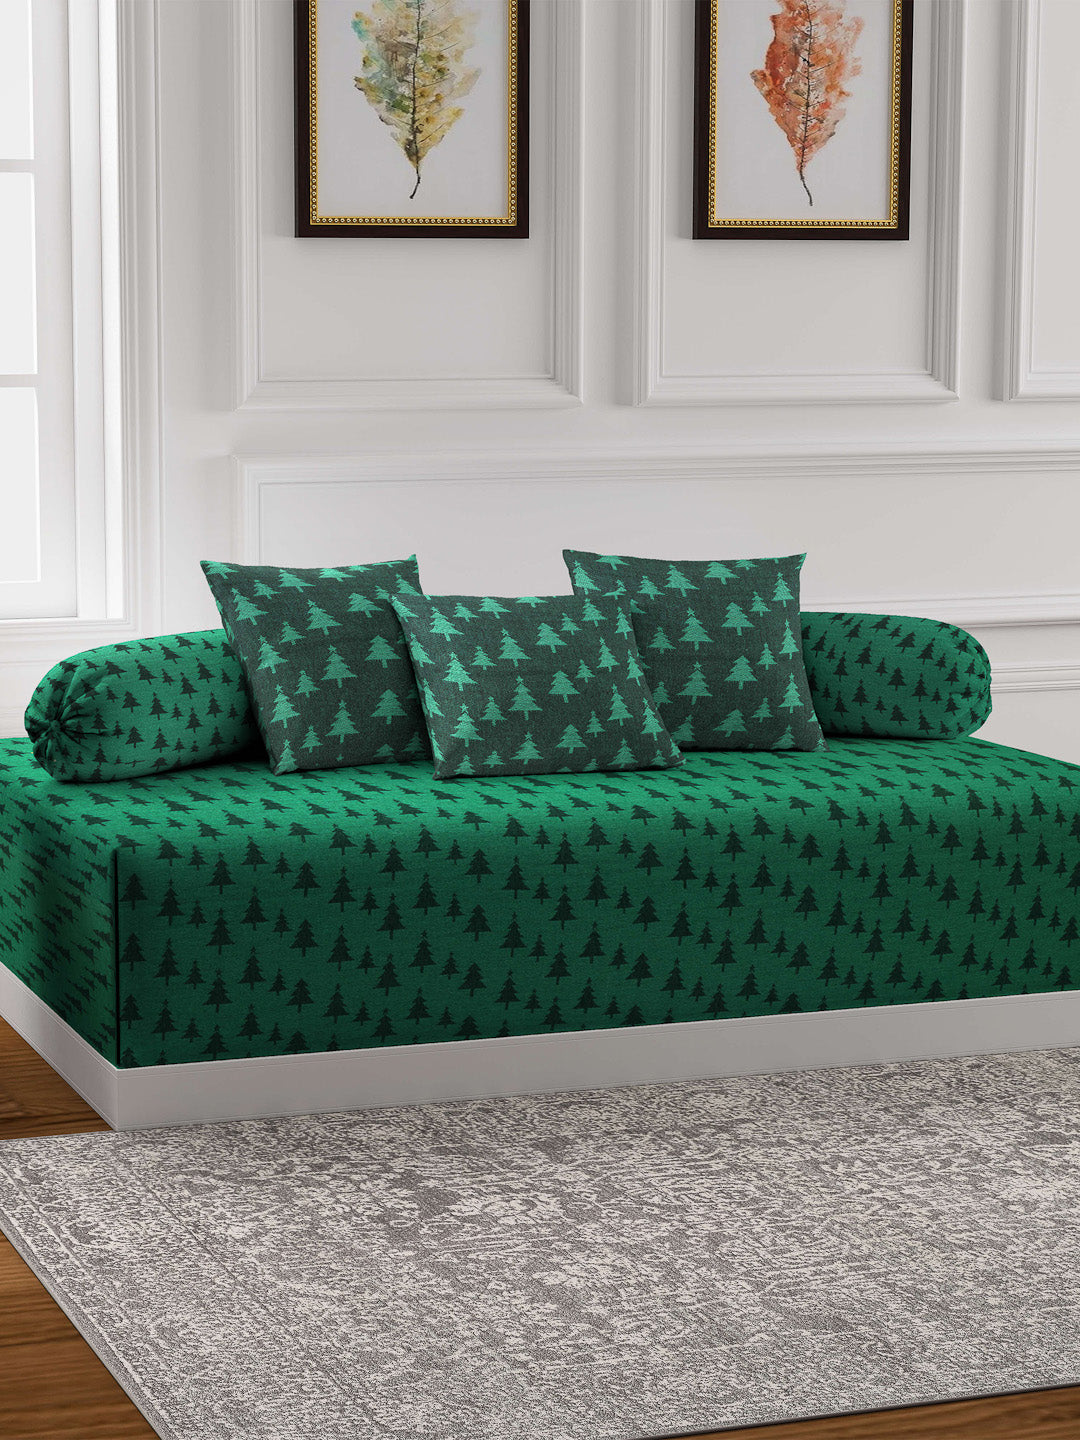 Klotthe Green Woven Design Single Bedsheet With 2 Bolster Covers & 3 Cushion Covers